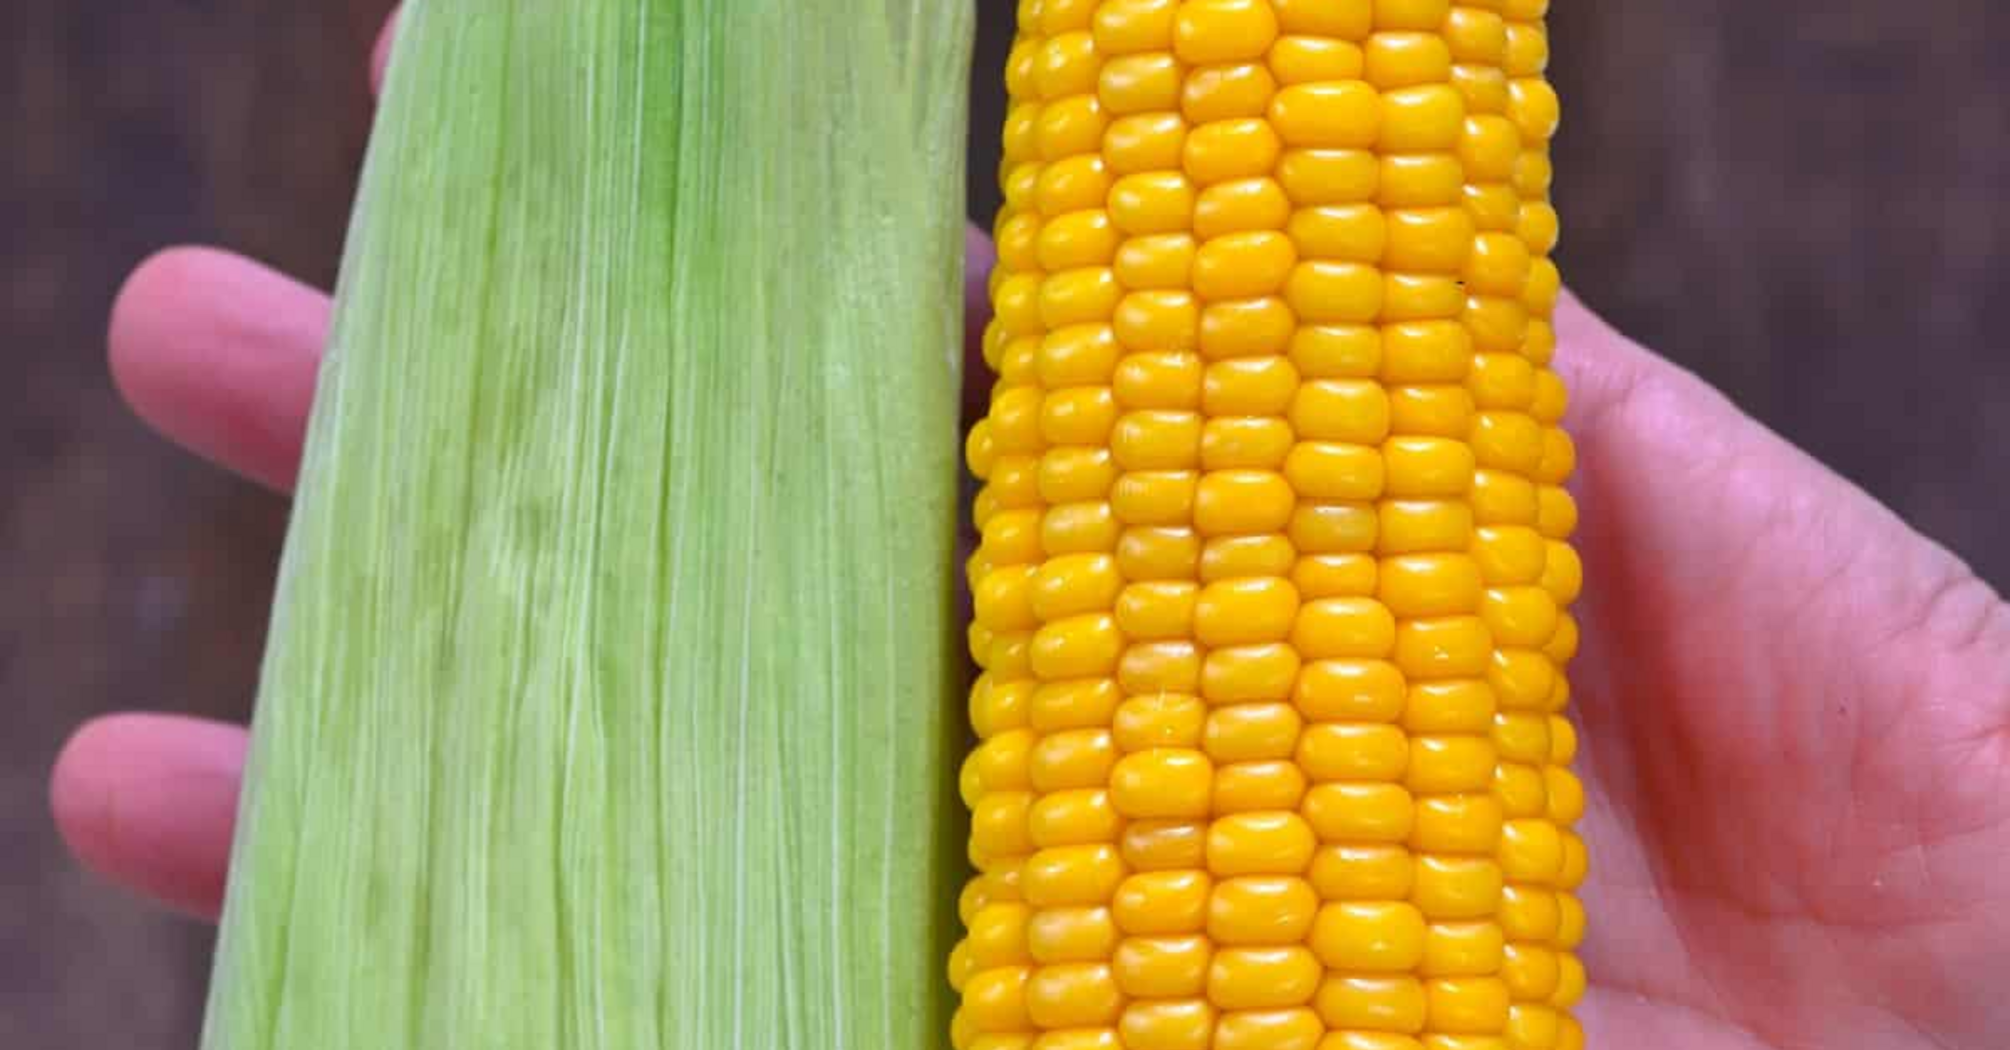 Tips and tricks for freezing corn